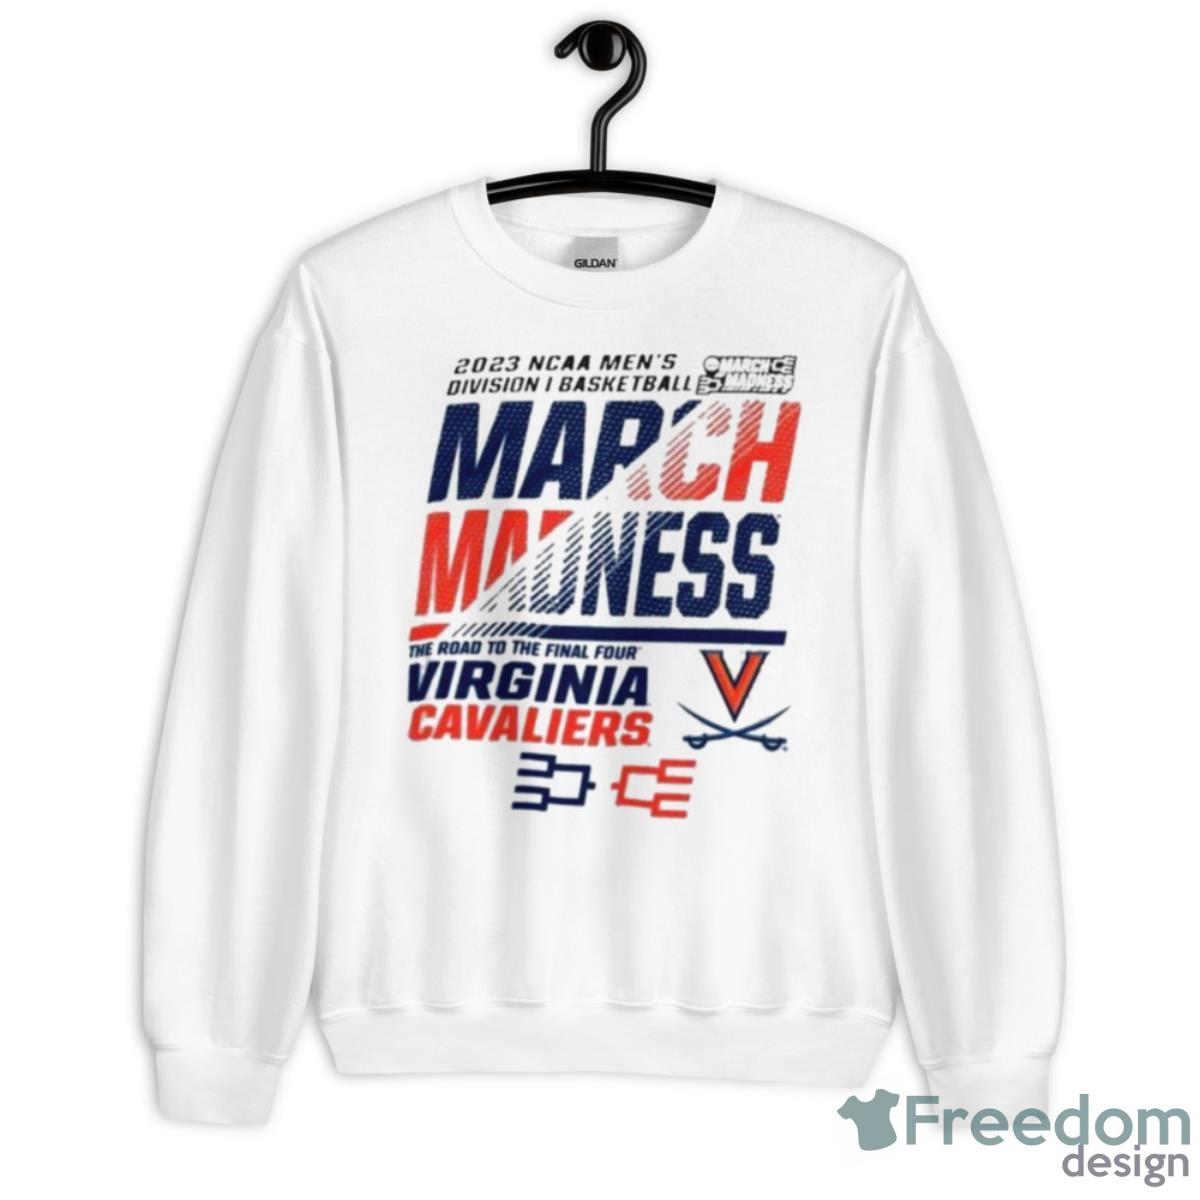 Virginia Cavaliers Men’s Basketball 2023 NCAA March Madness The Road To Final Four Shirt